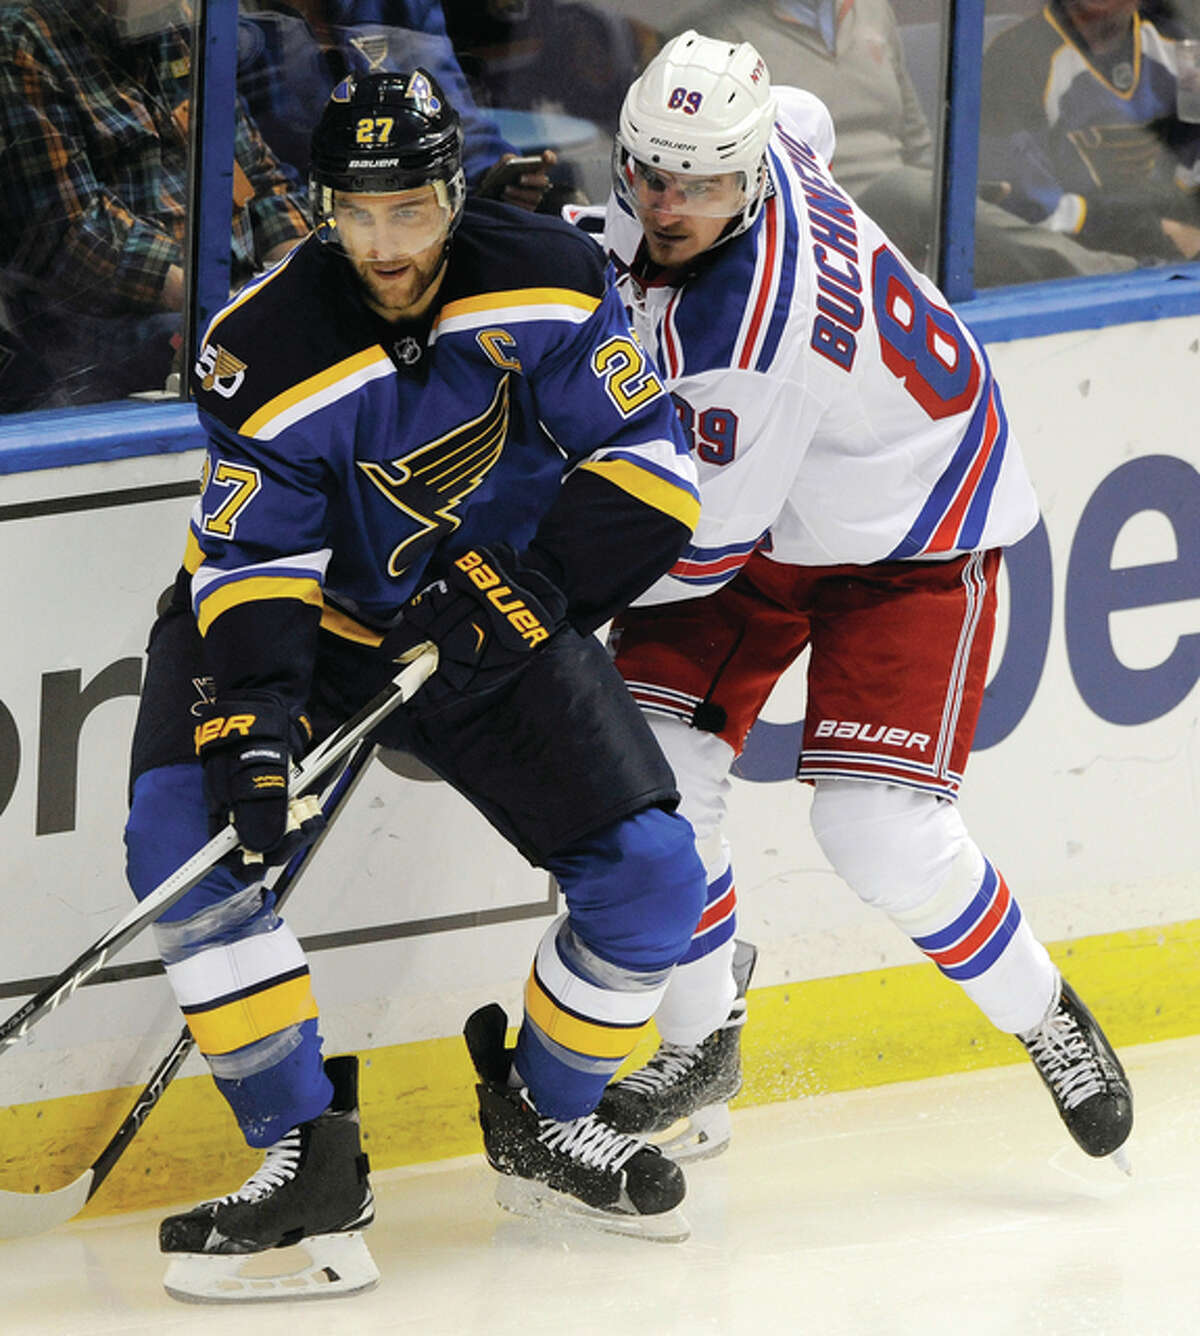 The Rangers’ Pavel Buchnevich (right) and the Blues’ Alex Pietrangelo look for the puck during the second period of the Blues win Saturday night in St. Louis.